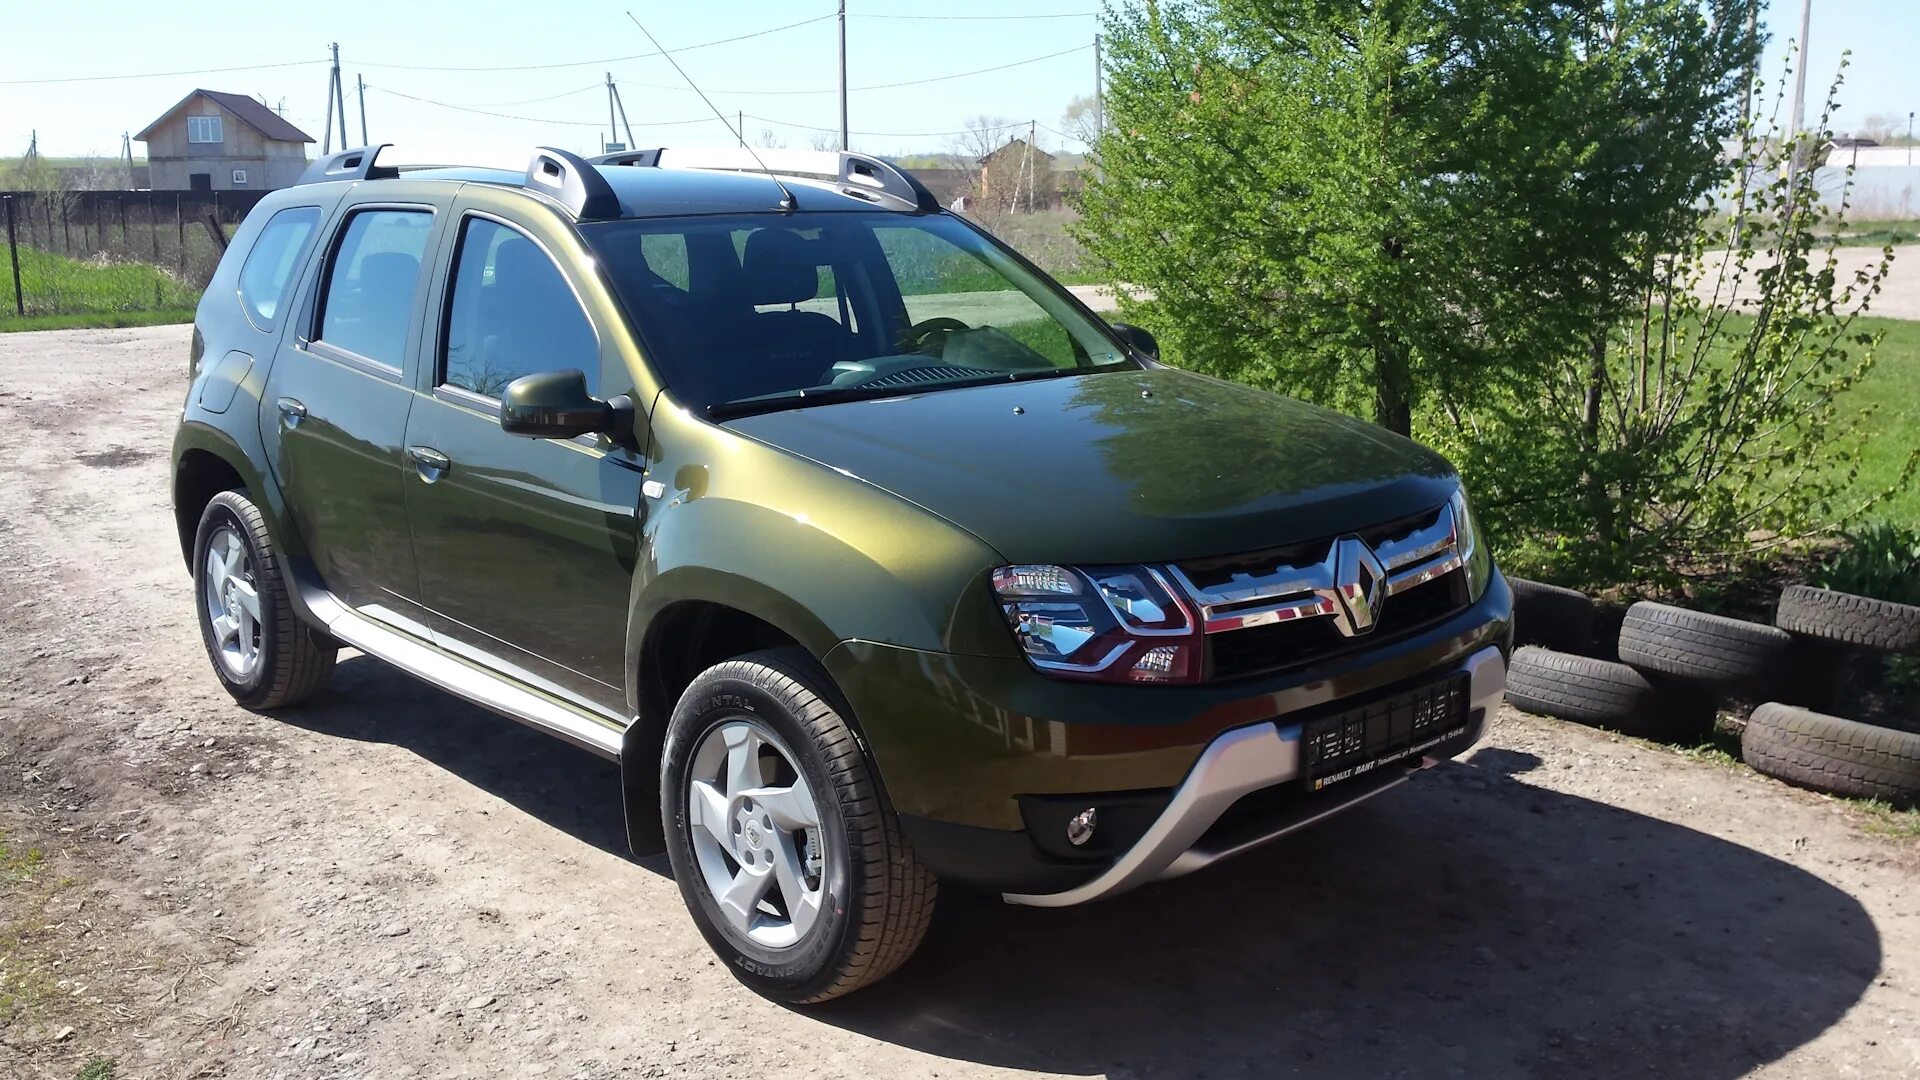 Renault Duster 1.5. Renault Duster DCI. Рено Дастер 1.5 дизель. Duster 2 1.5 DCI.